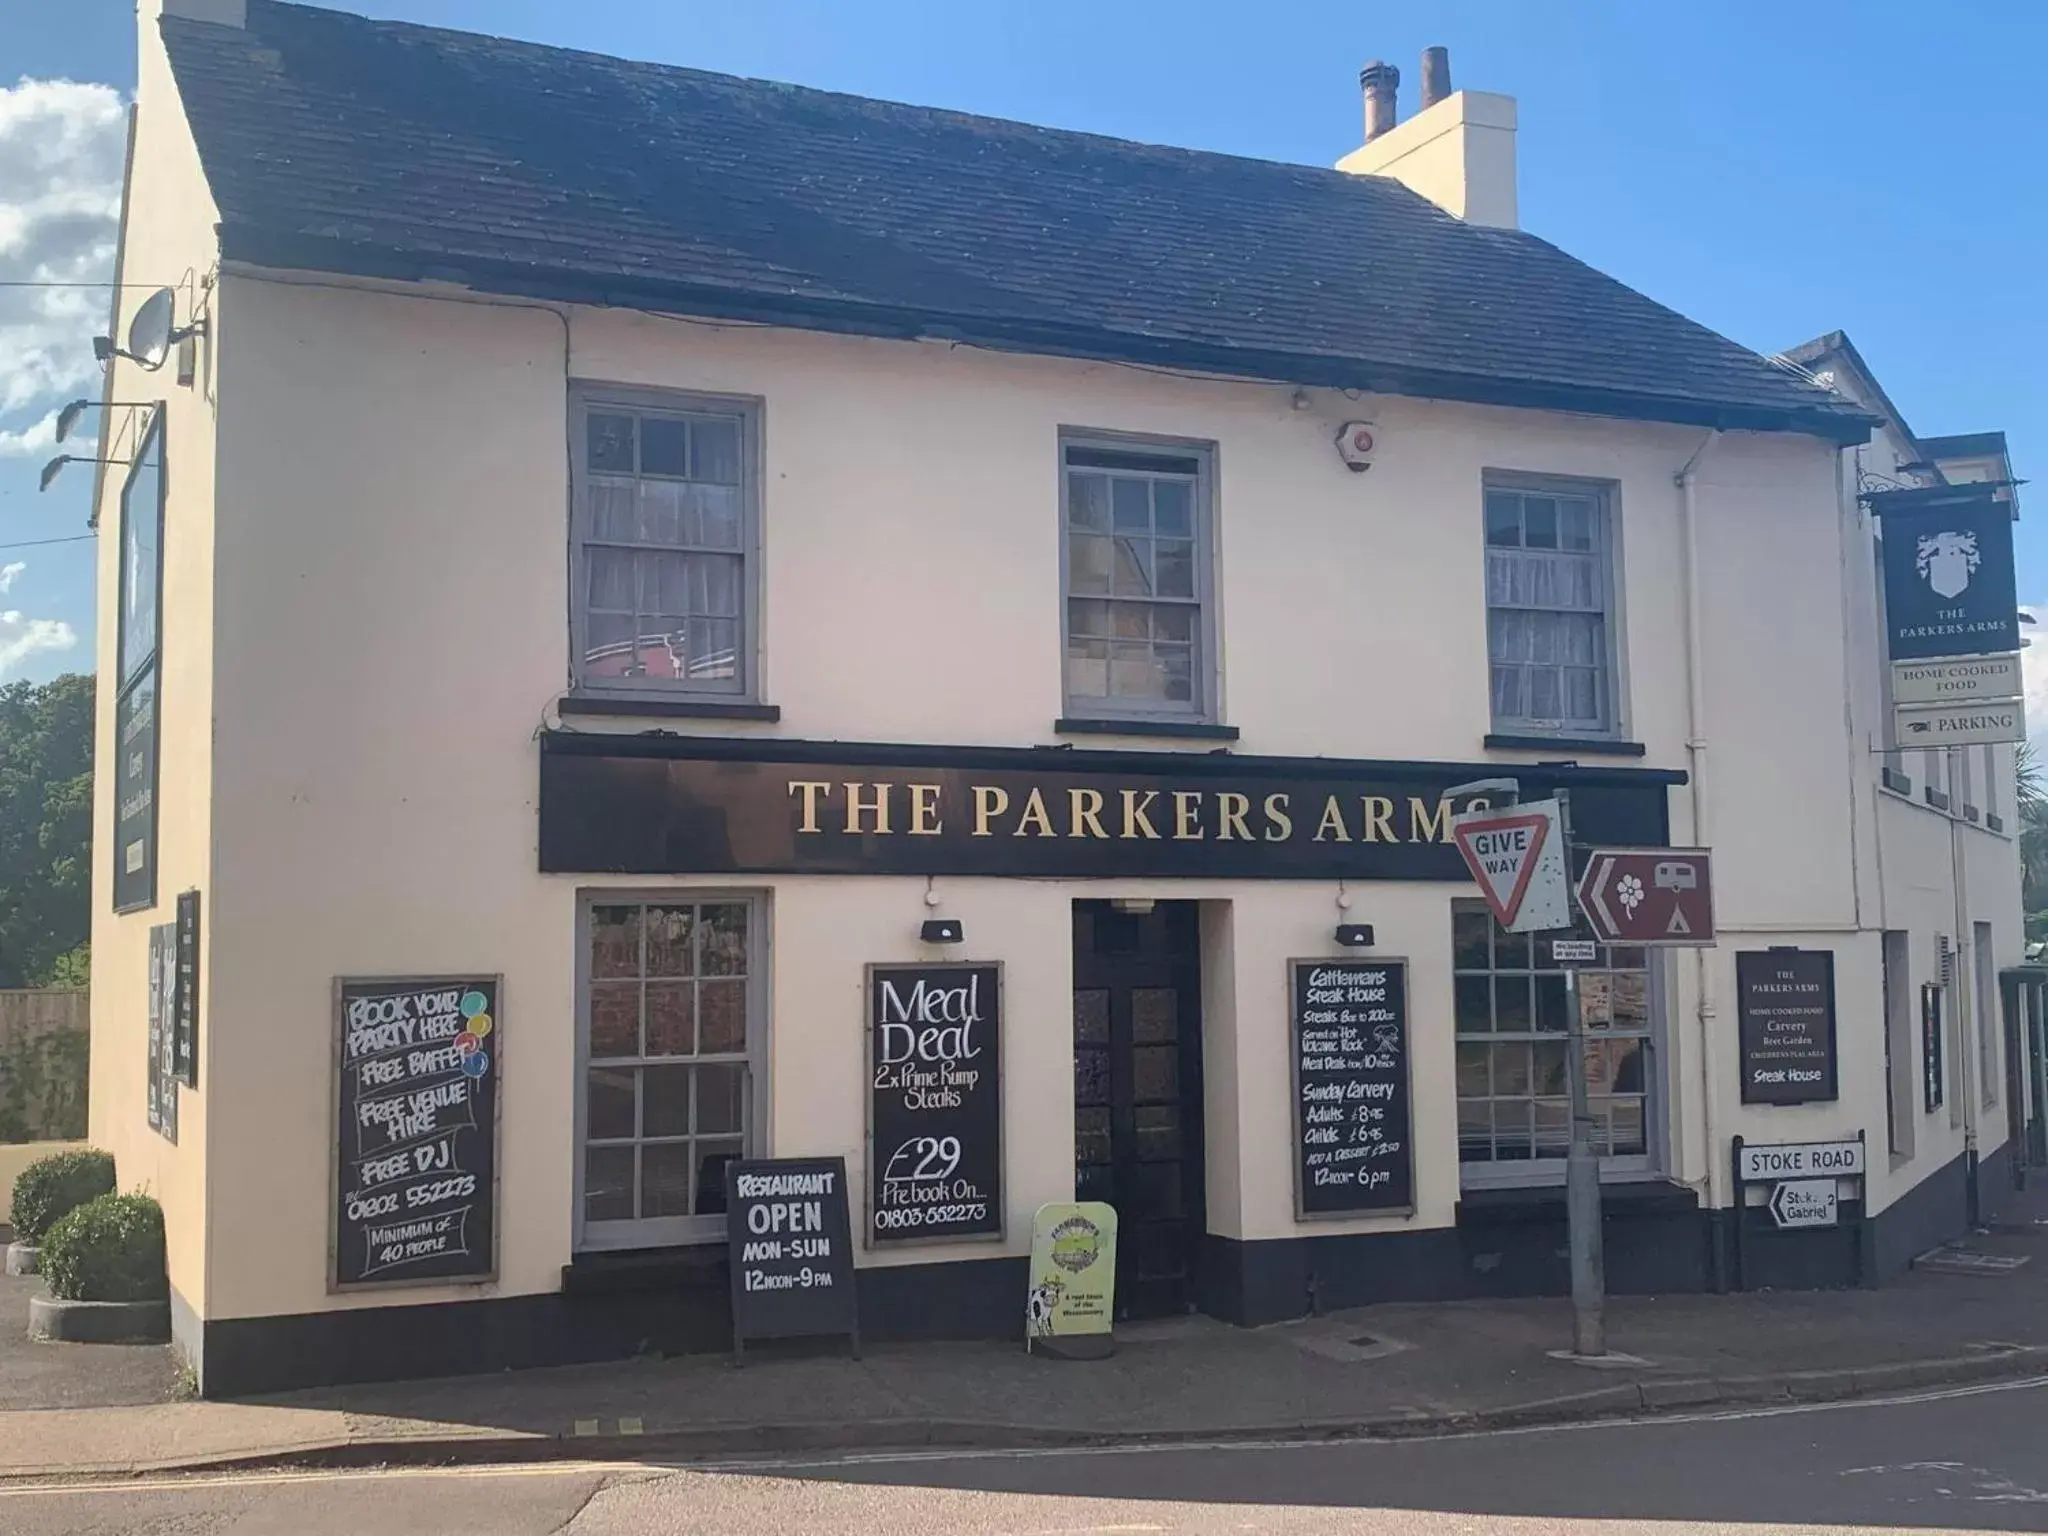 The Parkers Arms - The home of Cattlemans Steakhouse